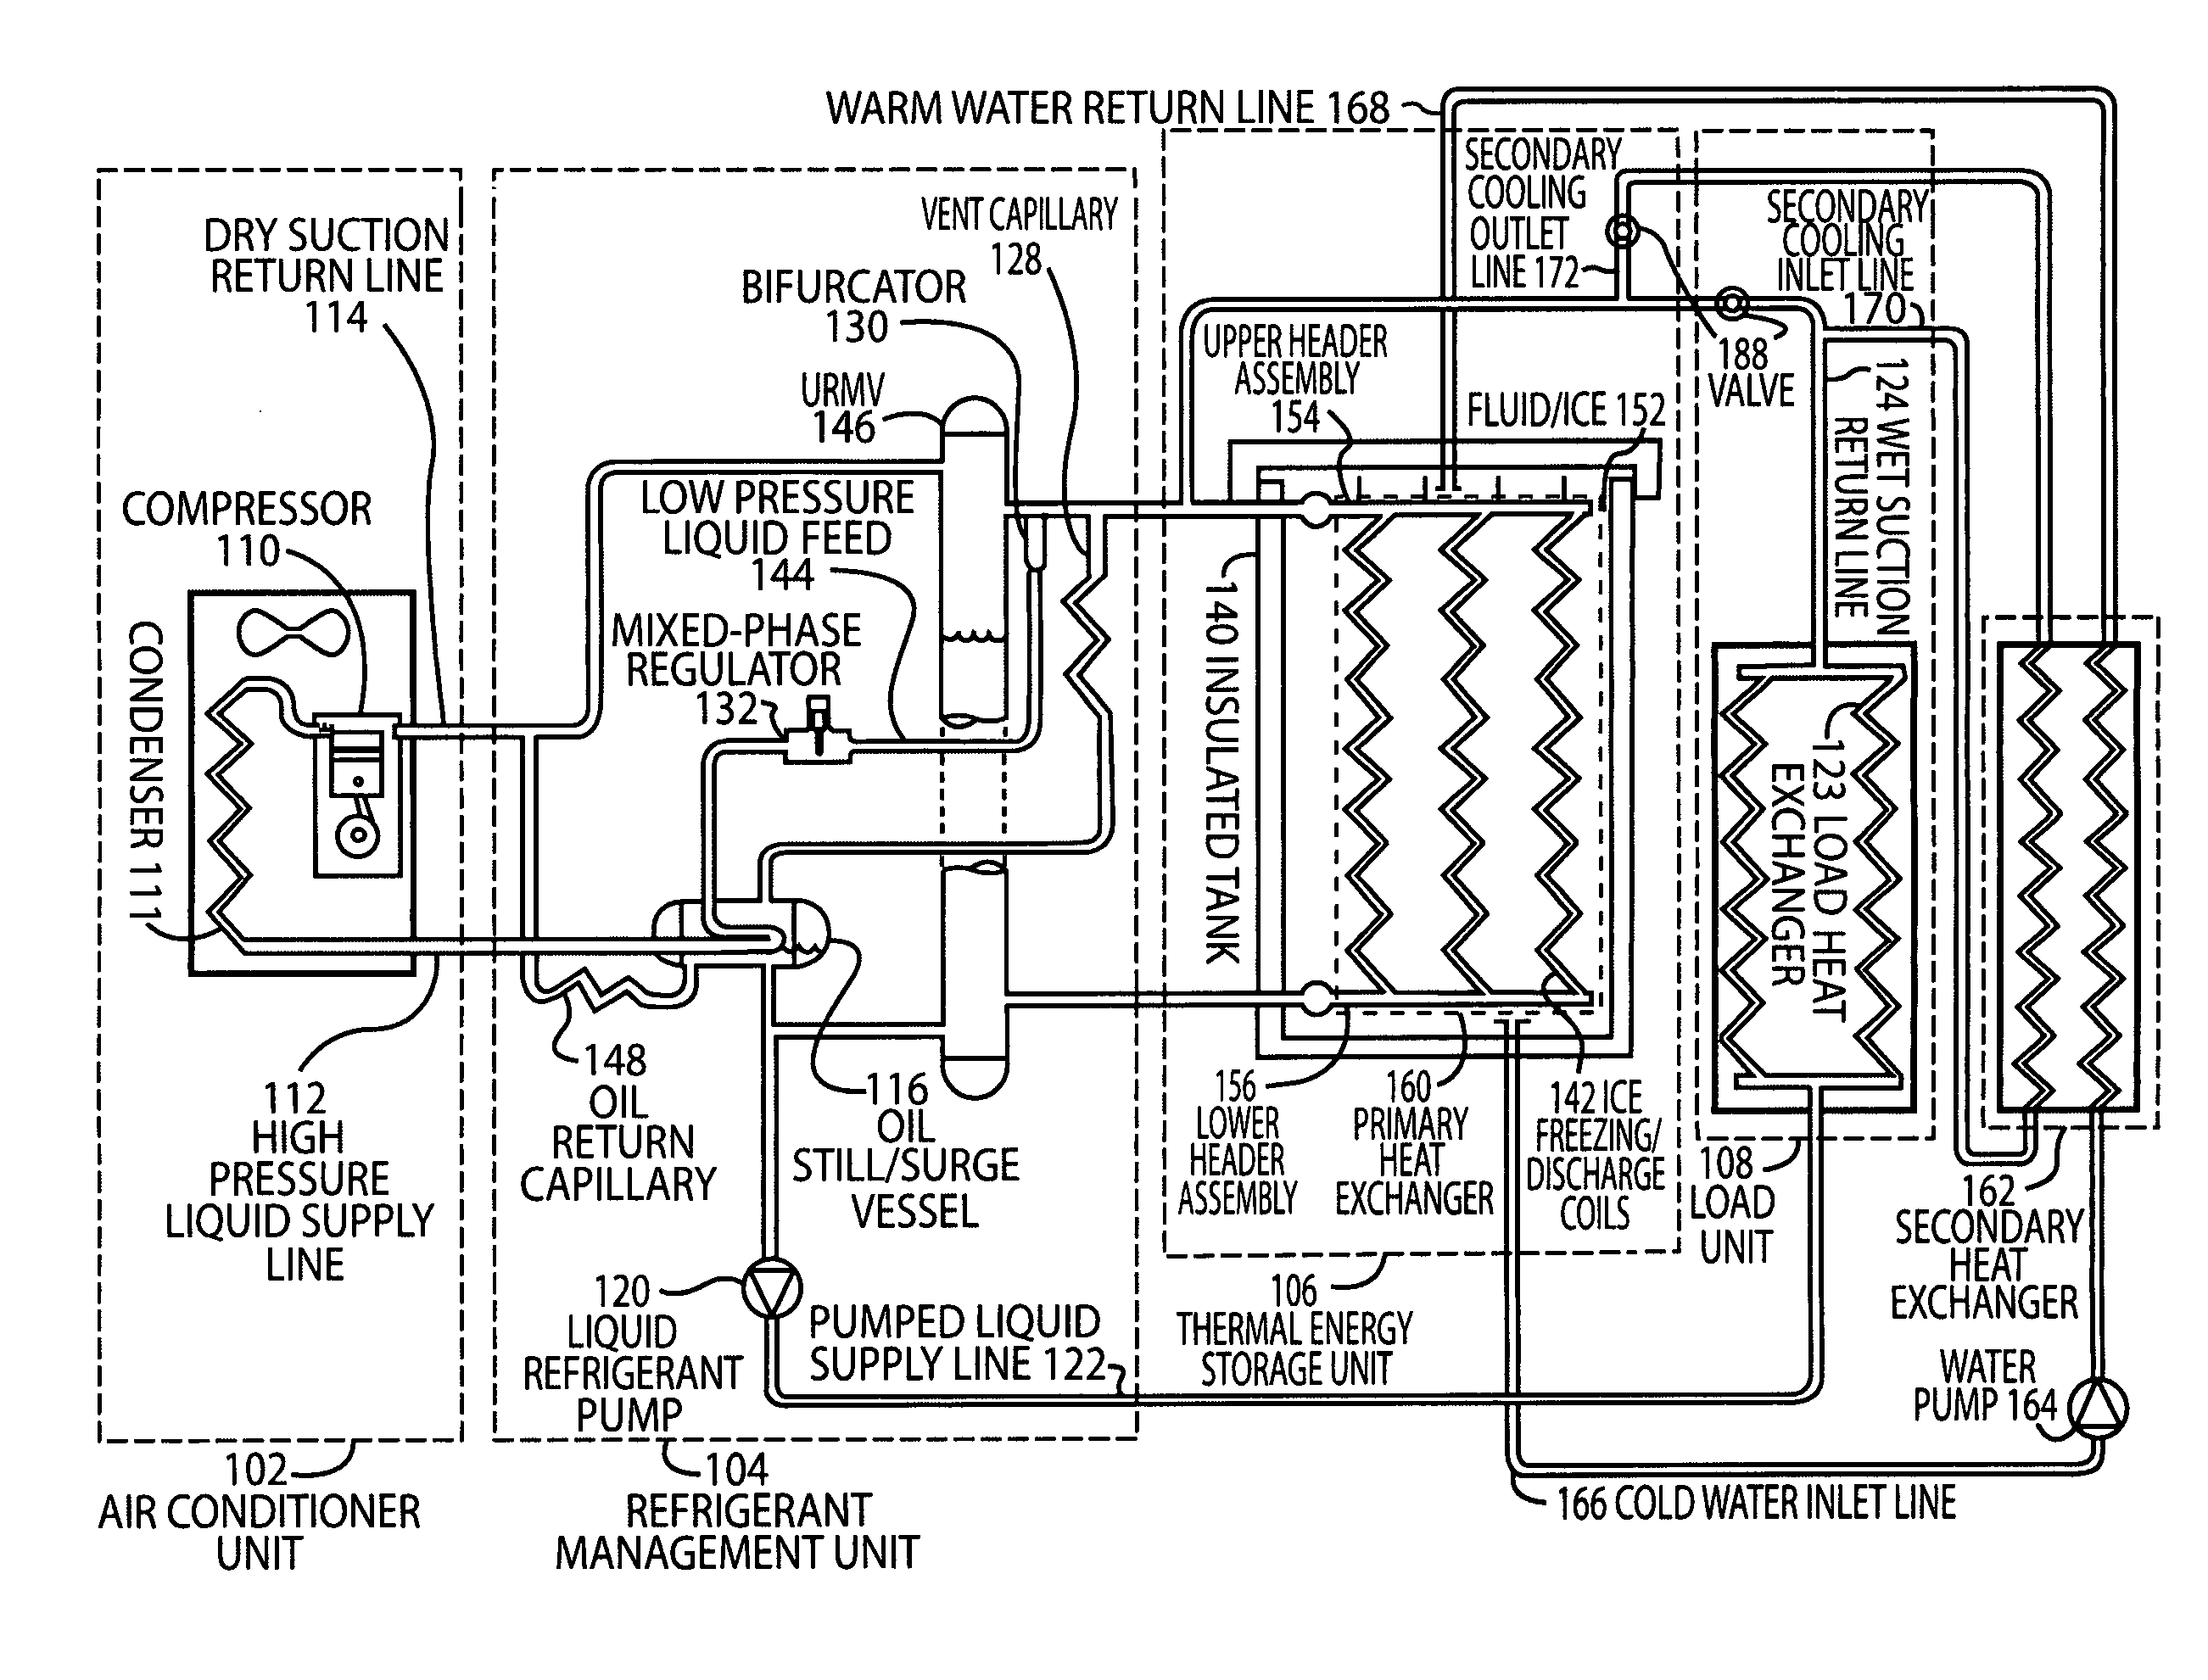 Refrigerant-based thermal energy storage and cooling system with enhanced heat exchange capability